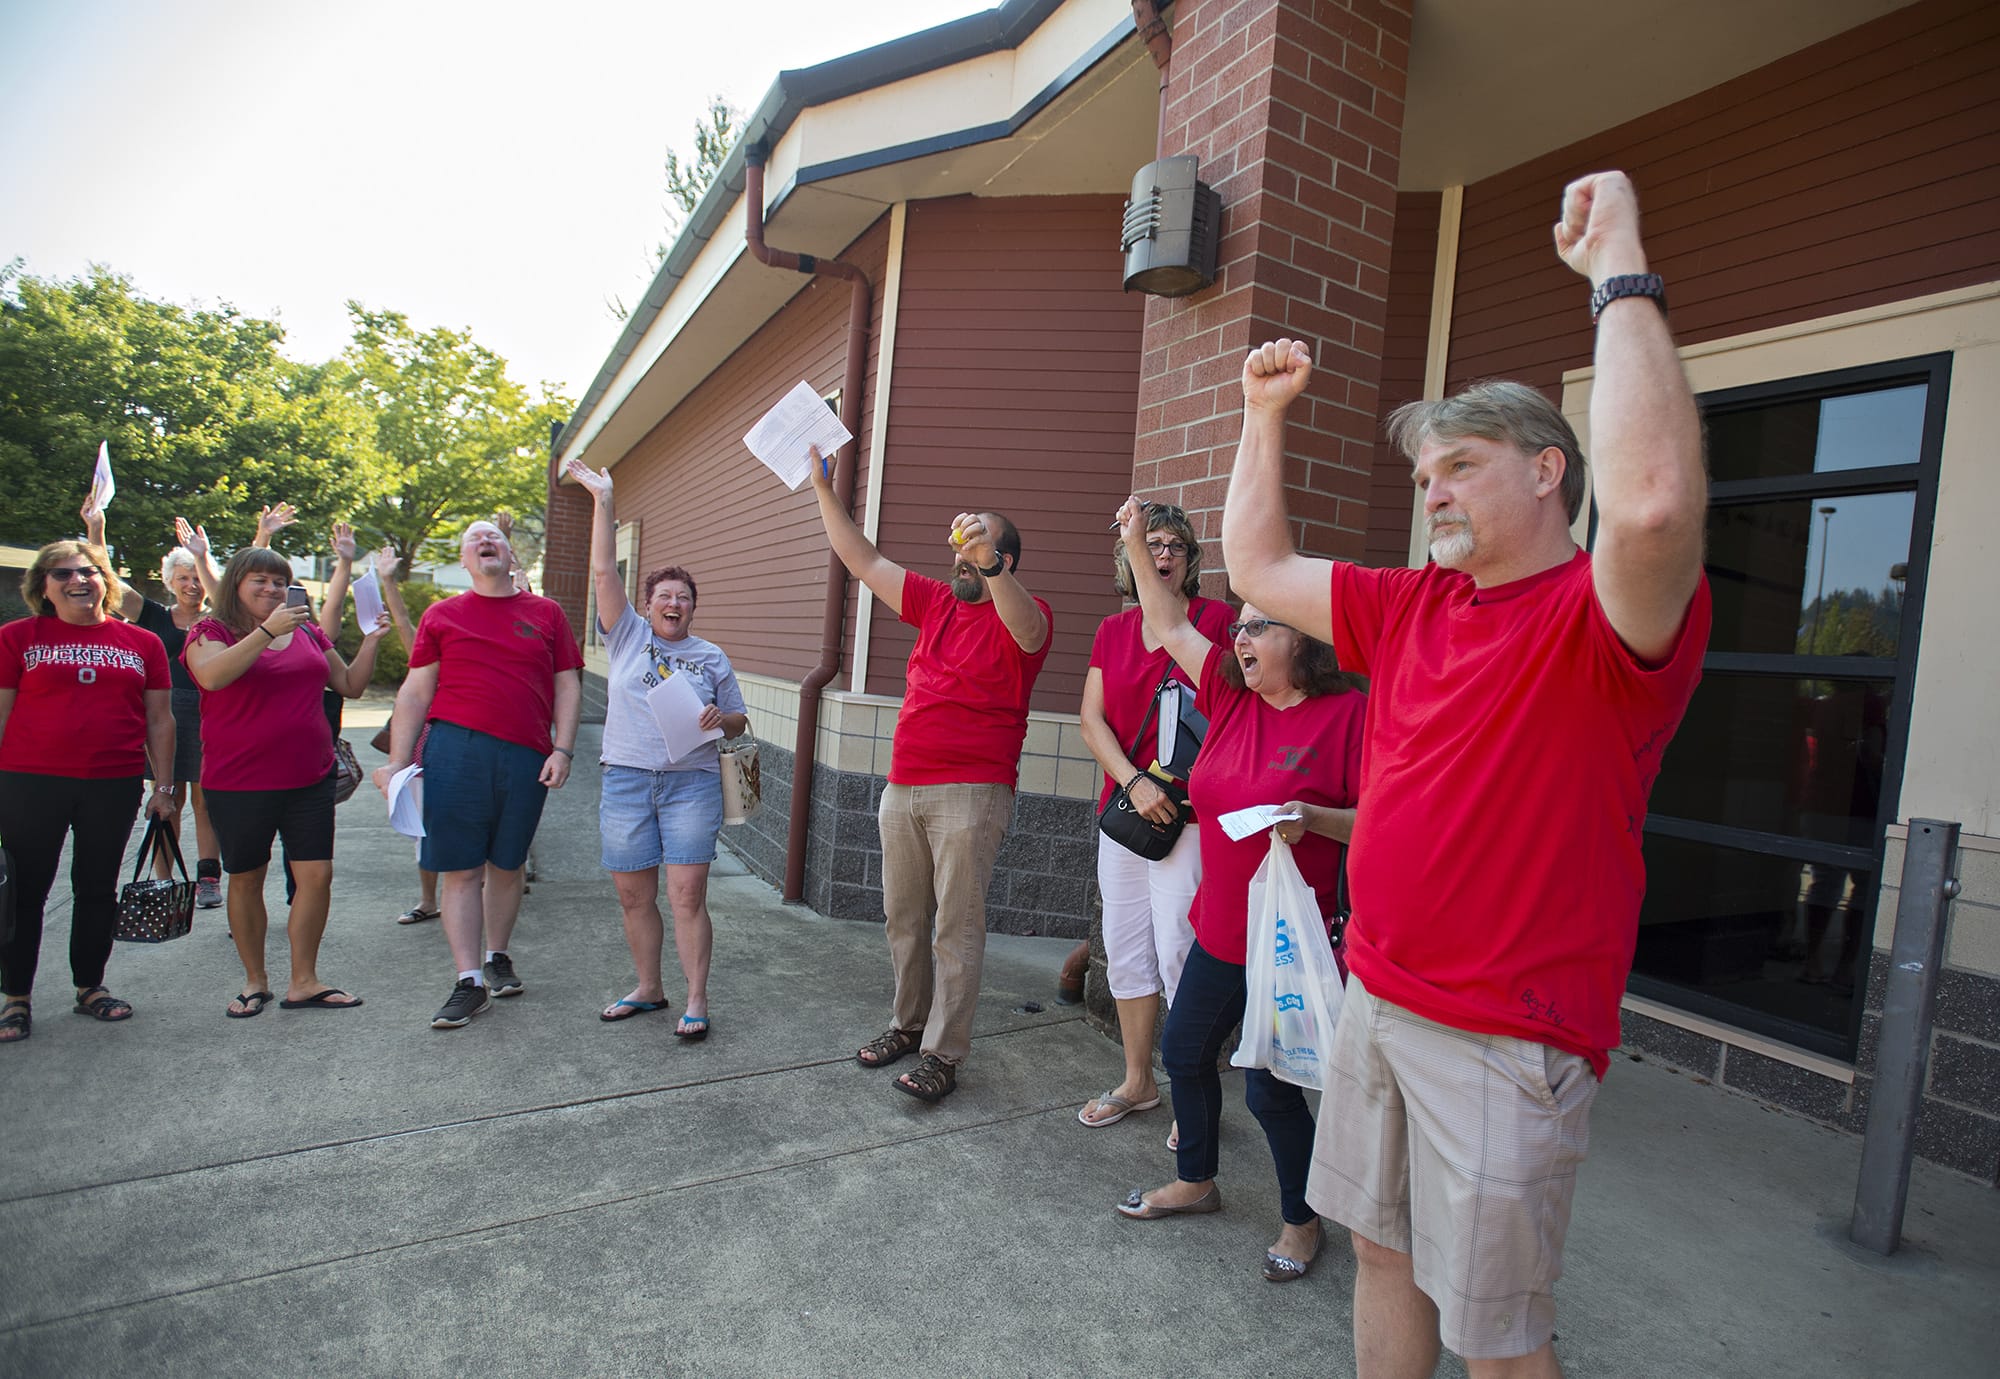 Eric Engebretson, president of the Washougal Association of Teachers, right, celebrates with fellow educators outside Washougal High School after the union unanimously ratified their new contract Thursday morning, Sept. 6, 2018.